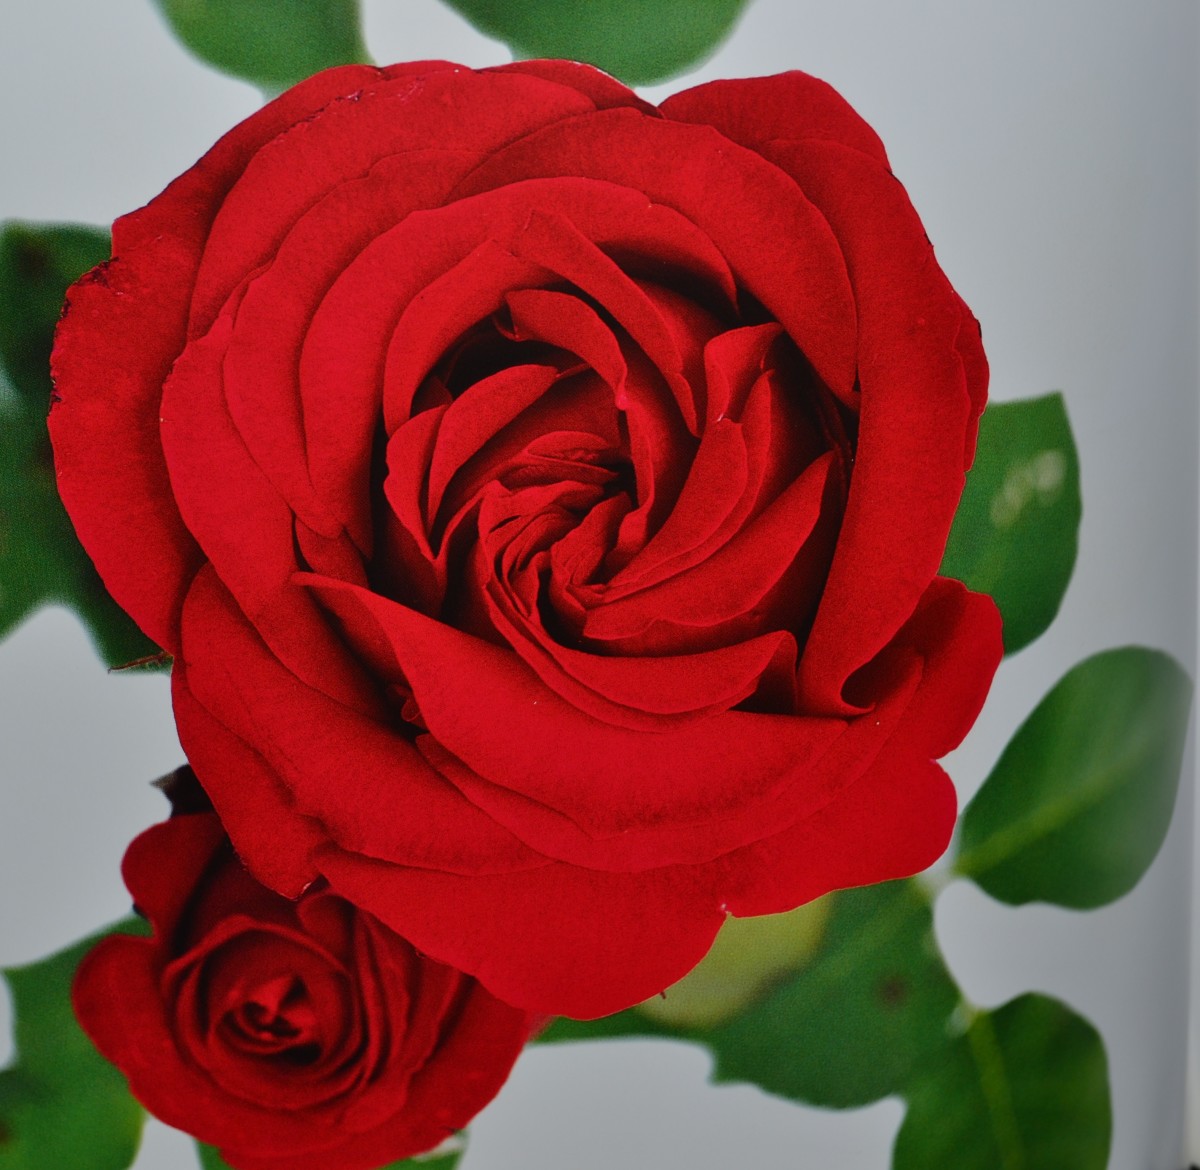 This classic bloom,  was selected as "world favourite rose" in 2000 by the World Federation of Rose Society and is listed in the rose hall of fame.The hybrid tea rose "INGRID BERGMAN"  named after the Swedish actress, is moderately fragrant.